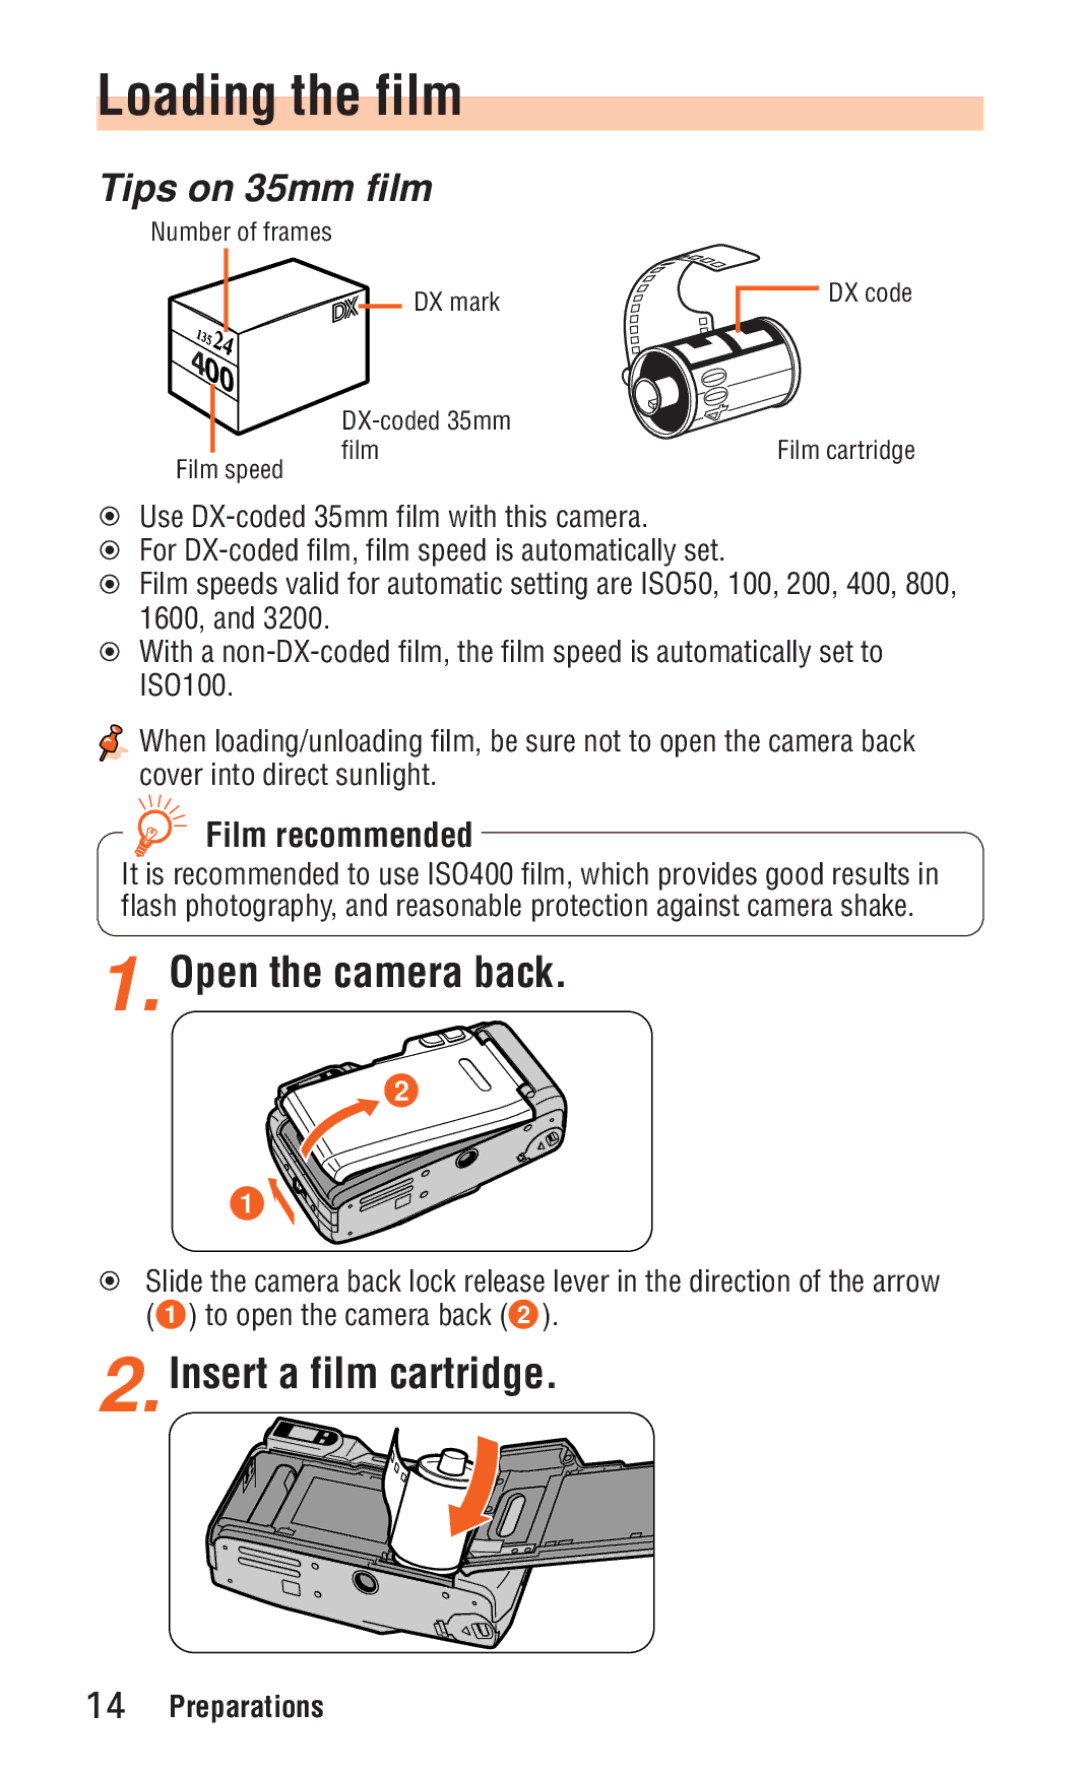 Nikon ED 120 Loading the film, Open the camera back, Insert a film cartridge, Tips on 35mm film, Film recommended 